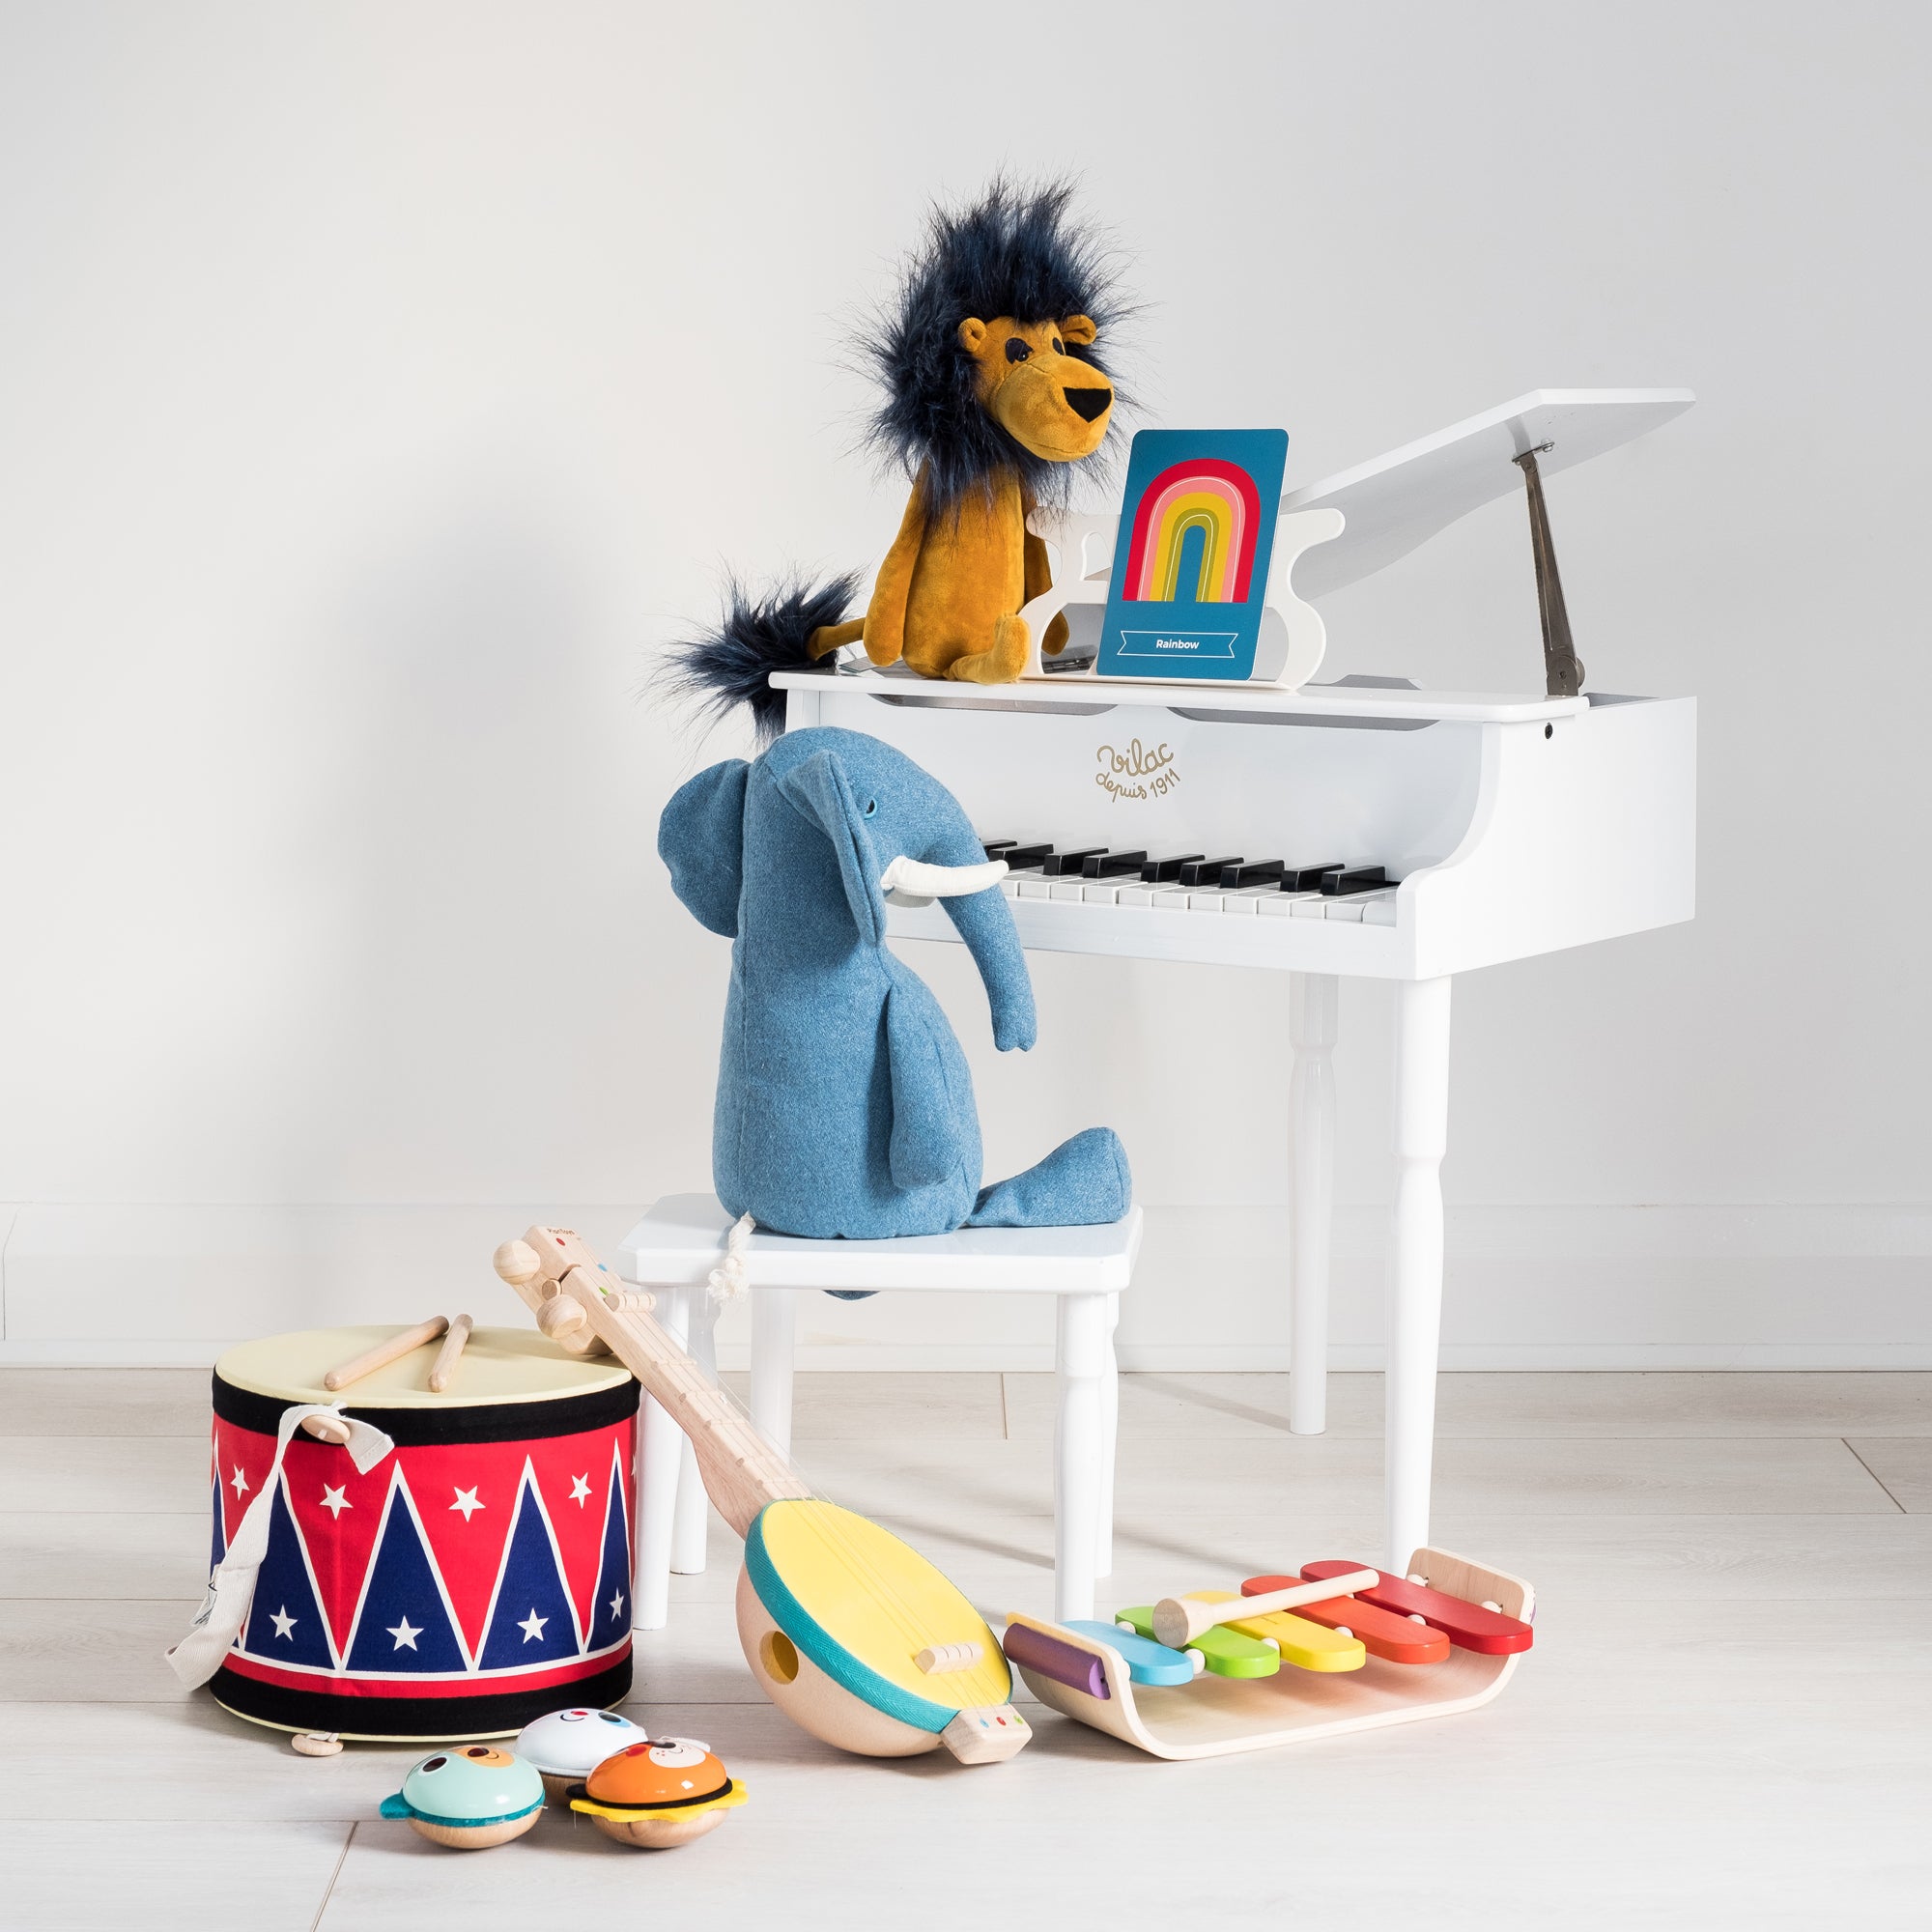 Musical Instrument Toys, available at Bobby Rabbit.